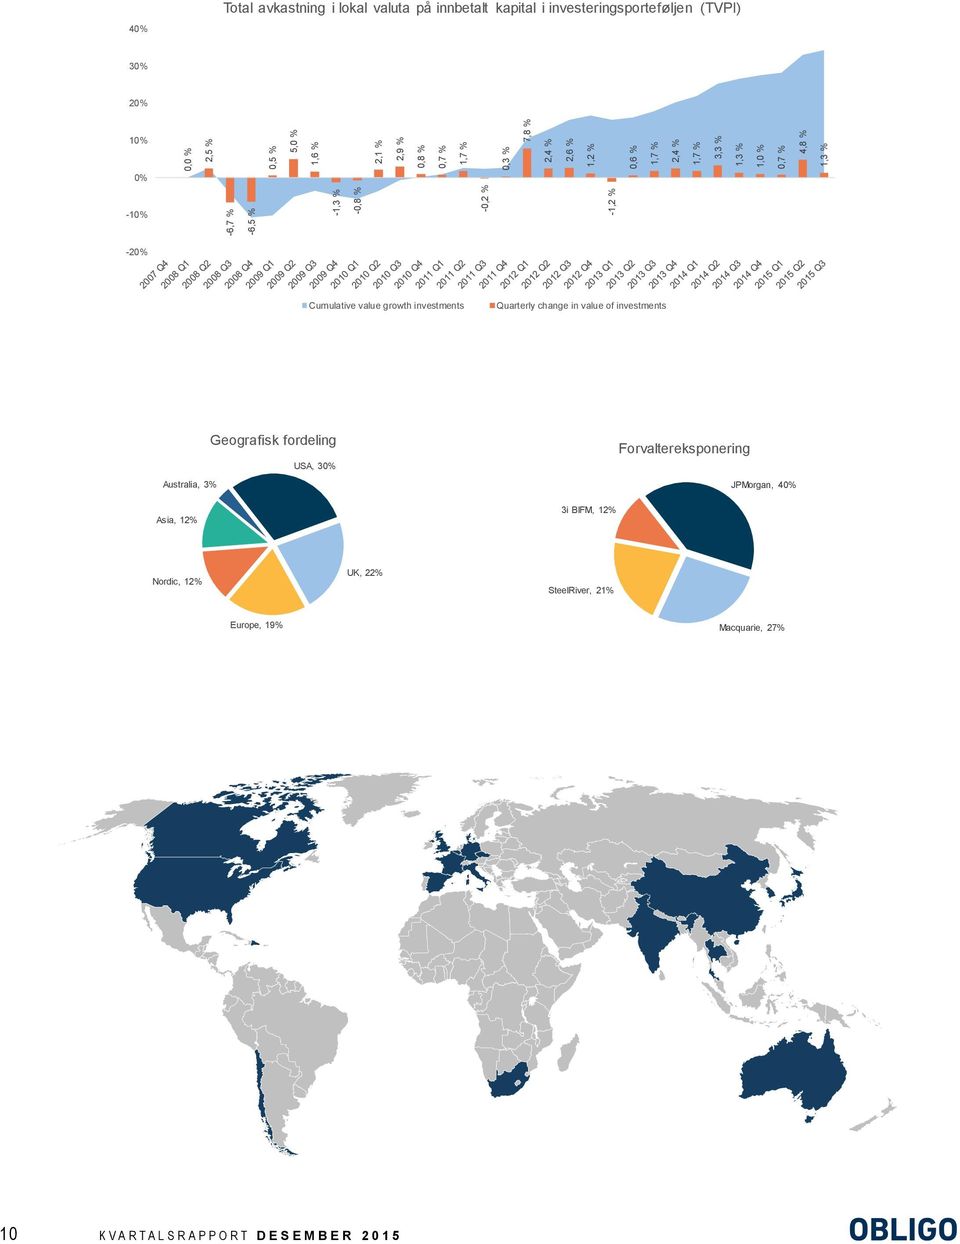 investments Quarterly change in value of investments GEOGRAFISK FORDELING Australia, 3% USA, 30% Asia, 12% Nordic, 12% Australia, 3% Asia, 12% Geografisk fordeling